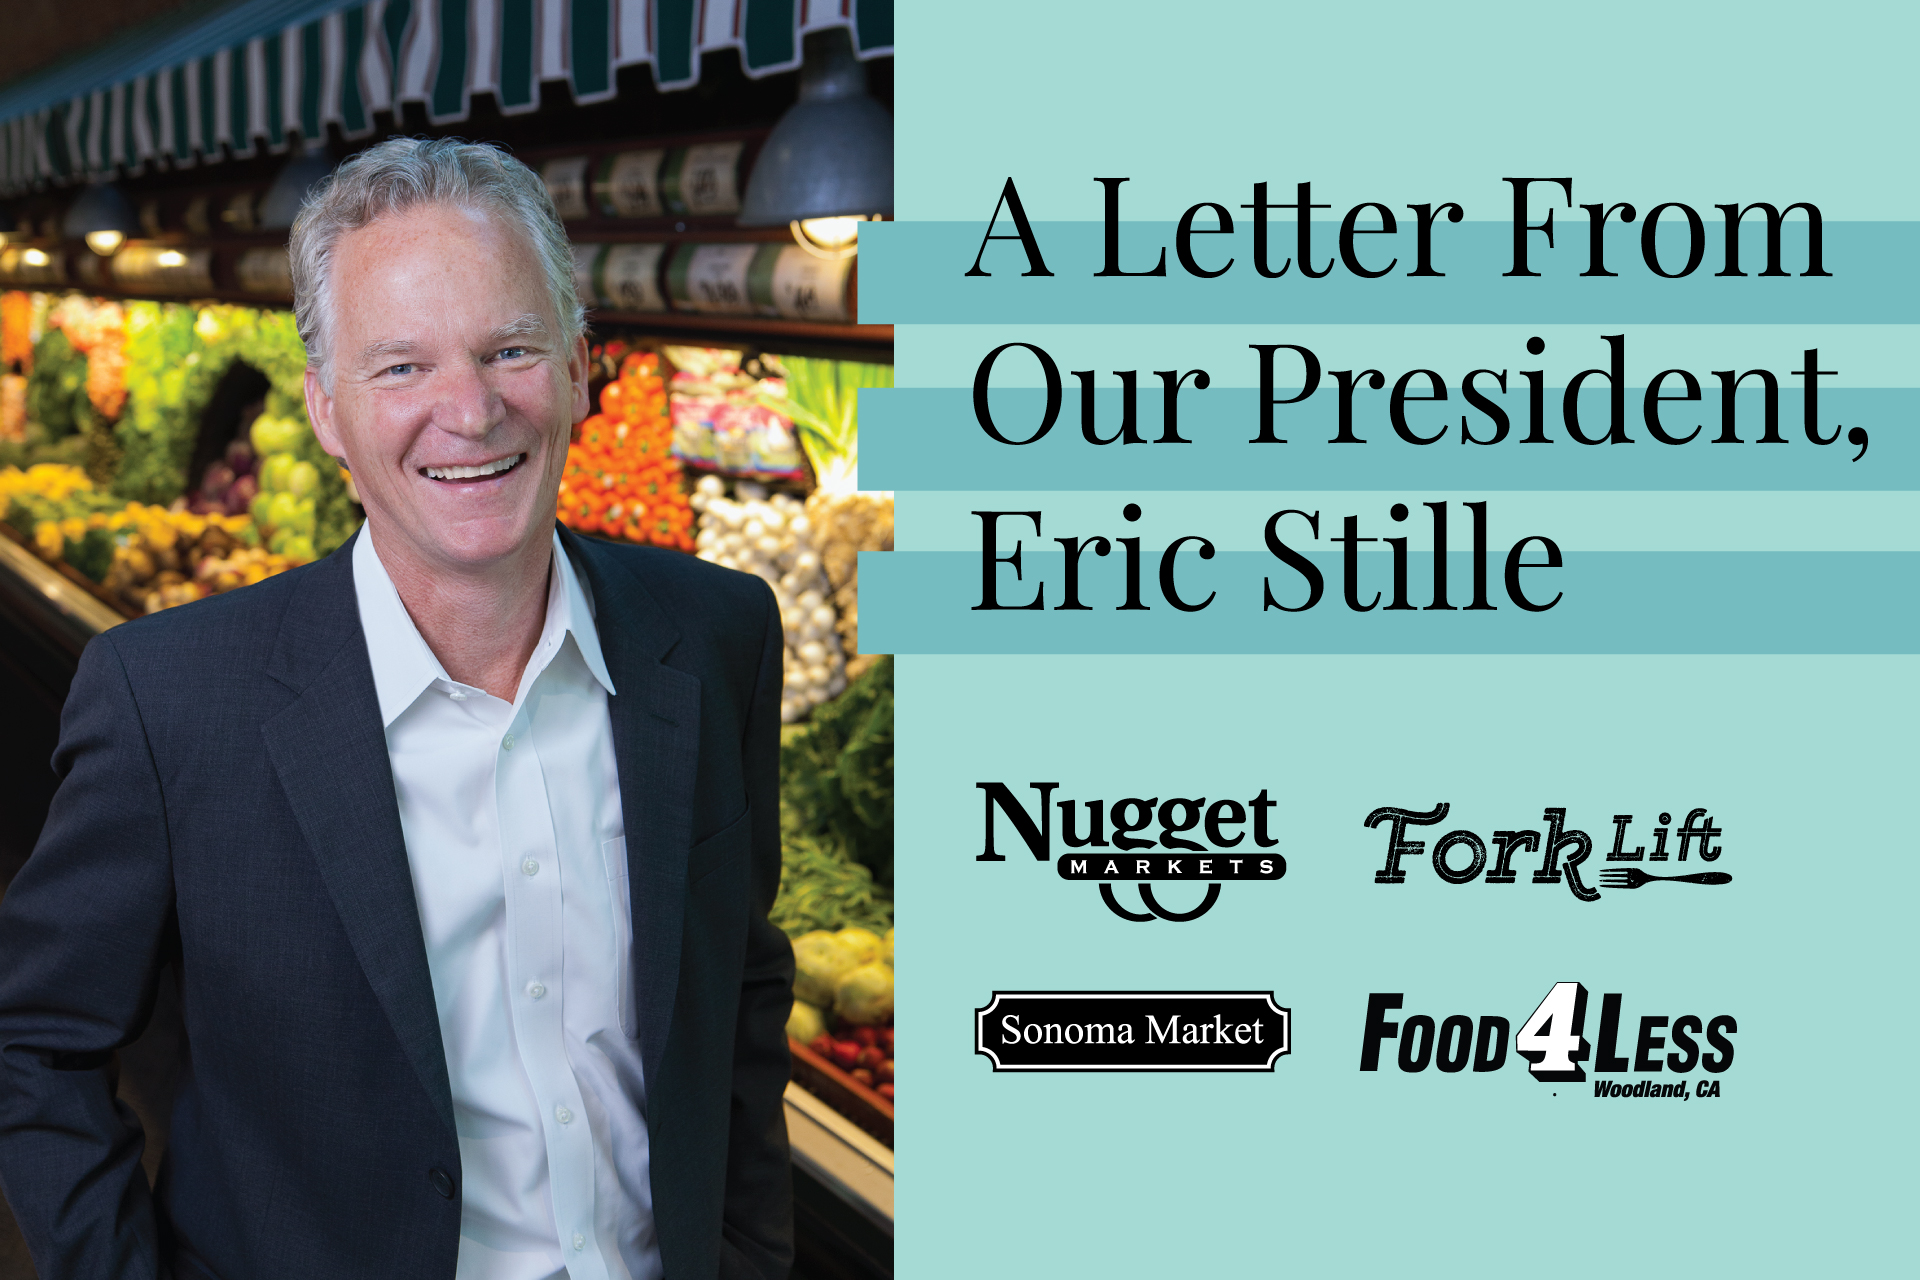 Eric Stille with text saying "a letter from our president, Eric Stille" and logos